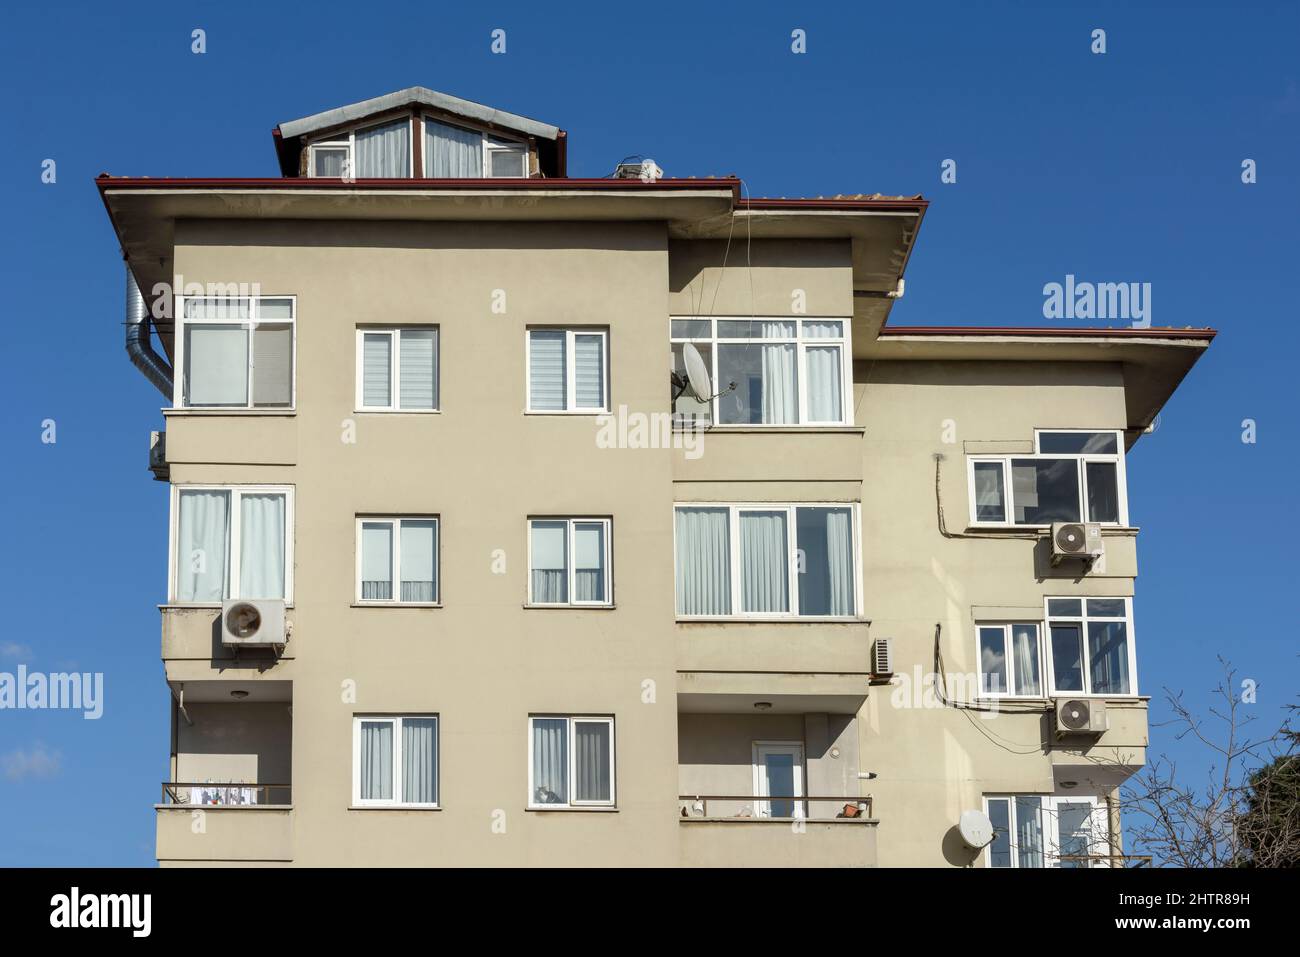 ISTANBUL, TURKEY - JANUARY 10, 2022: View from Istanbul streets, generic architecture in Kadikoy, the Anatolian side of Istanbul. Stock Photo